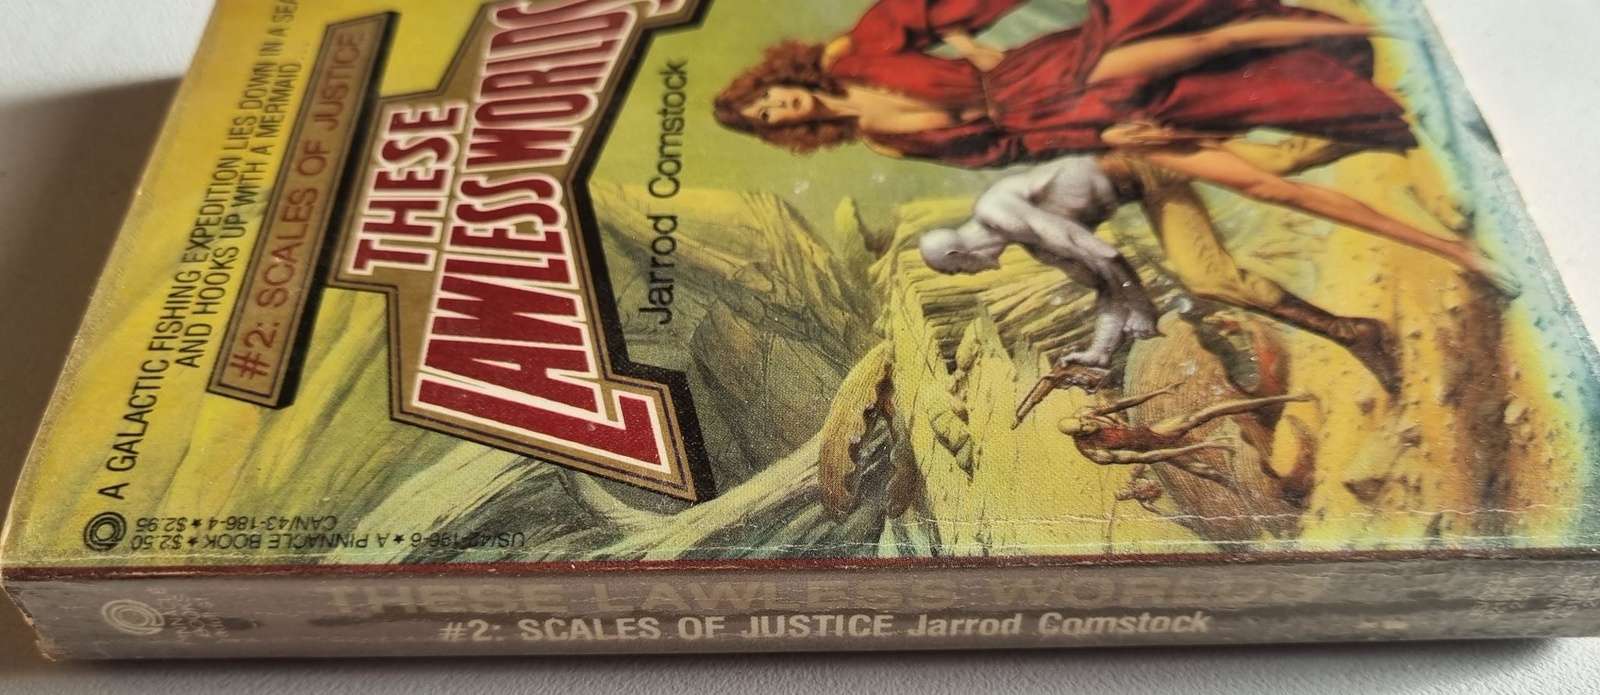 These Lawless Worlds: Scales of Justice - Jarrod Comstock